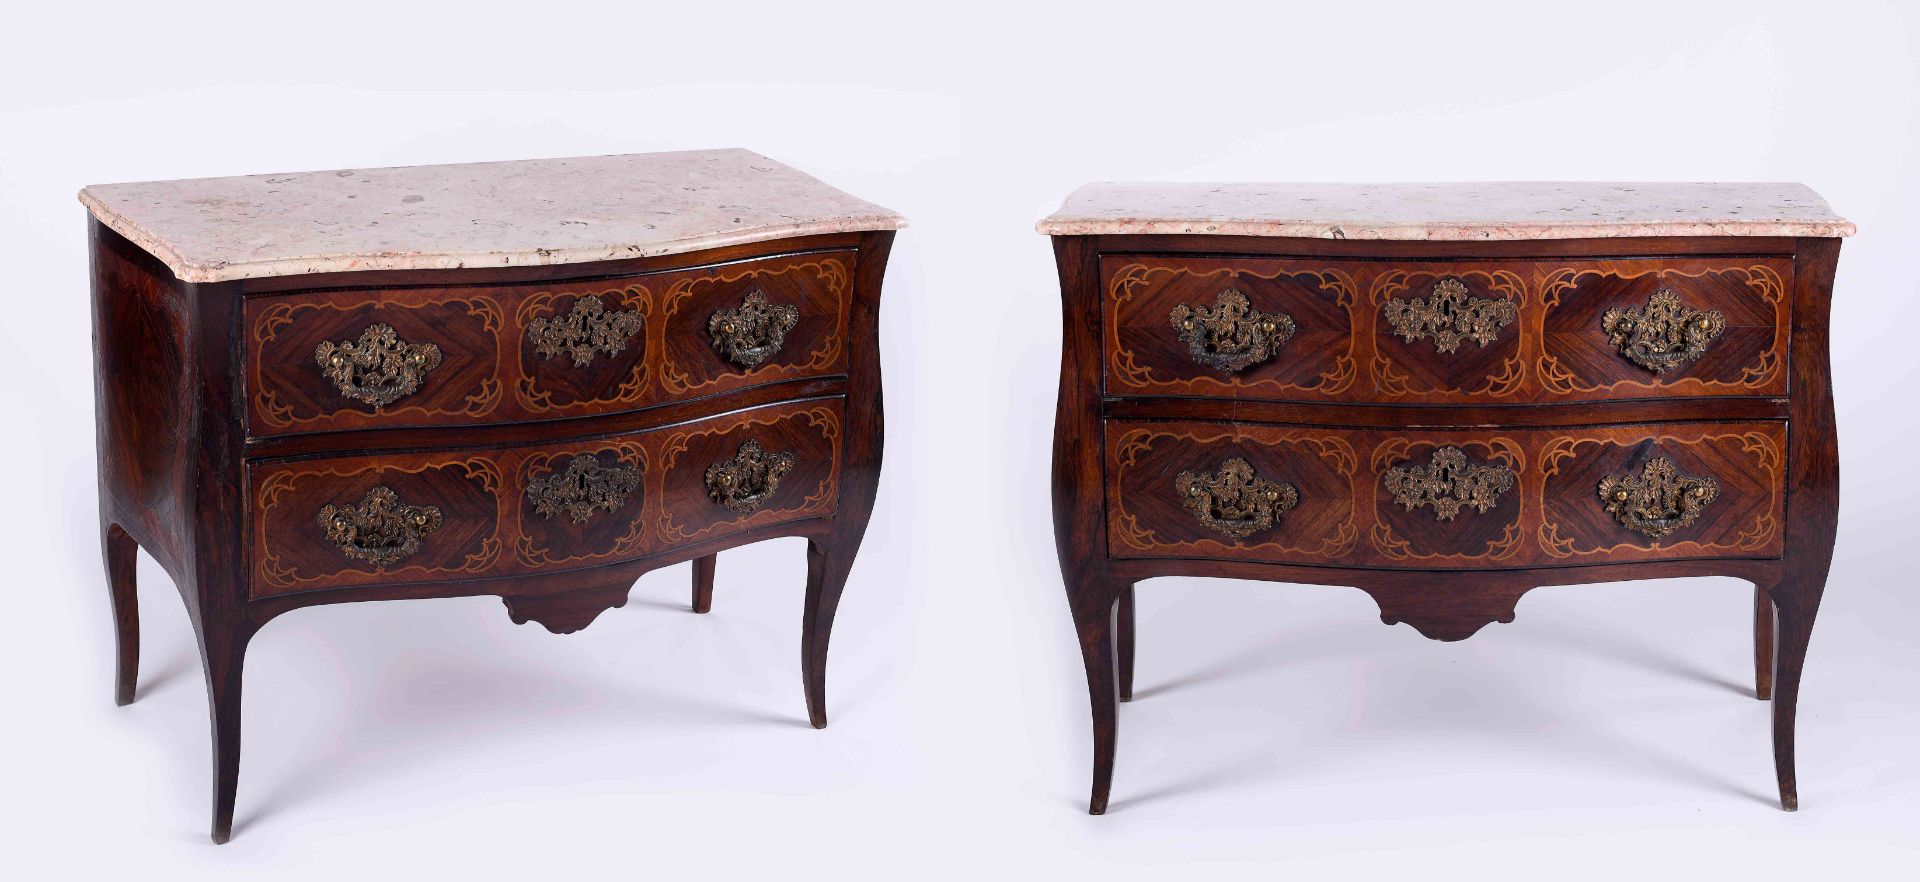 A pair of chests of drawers